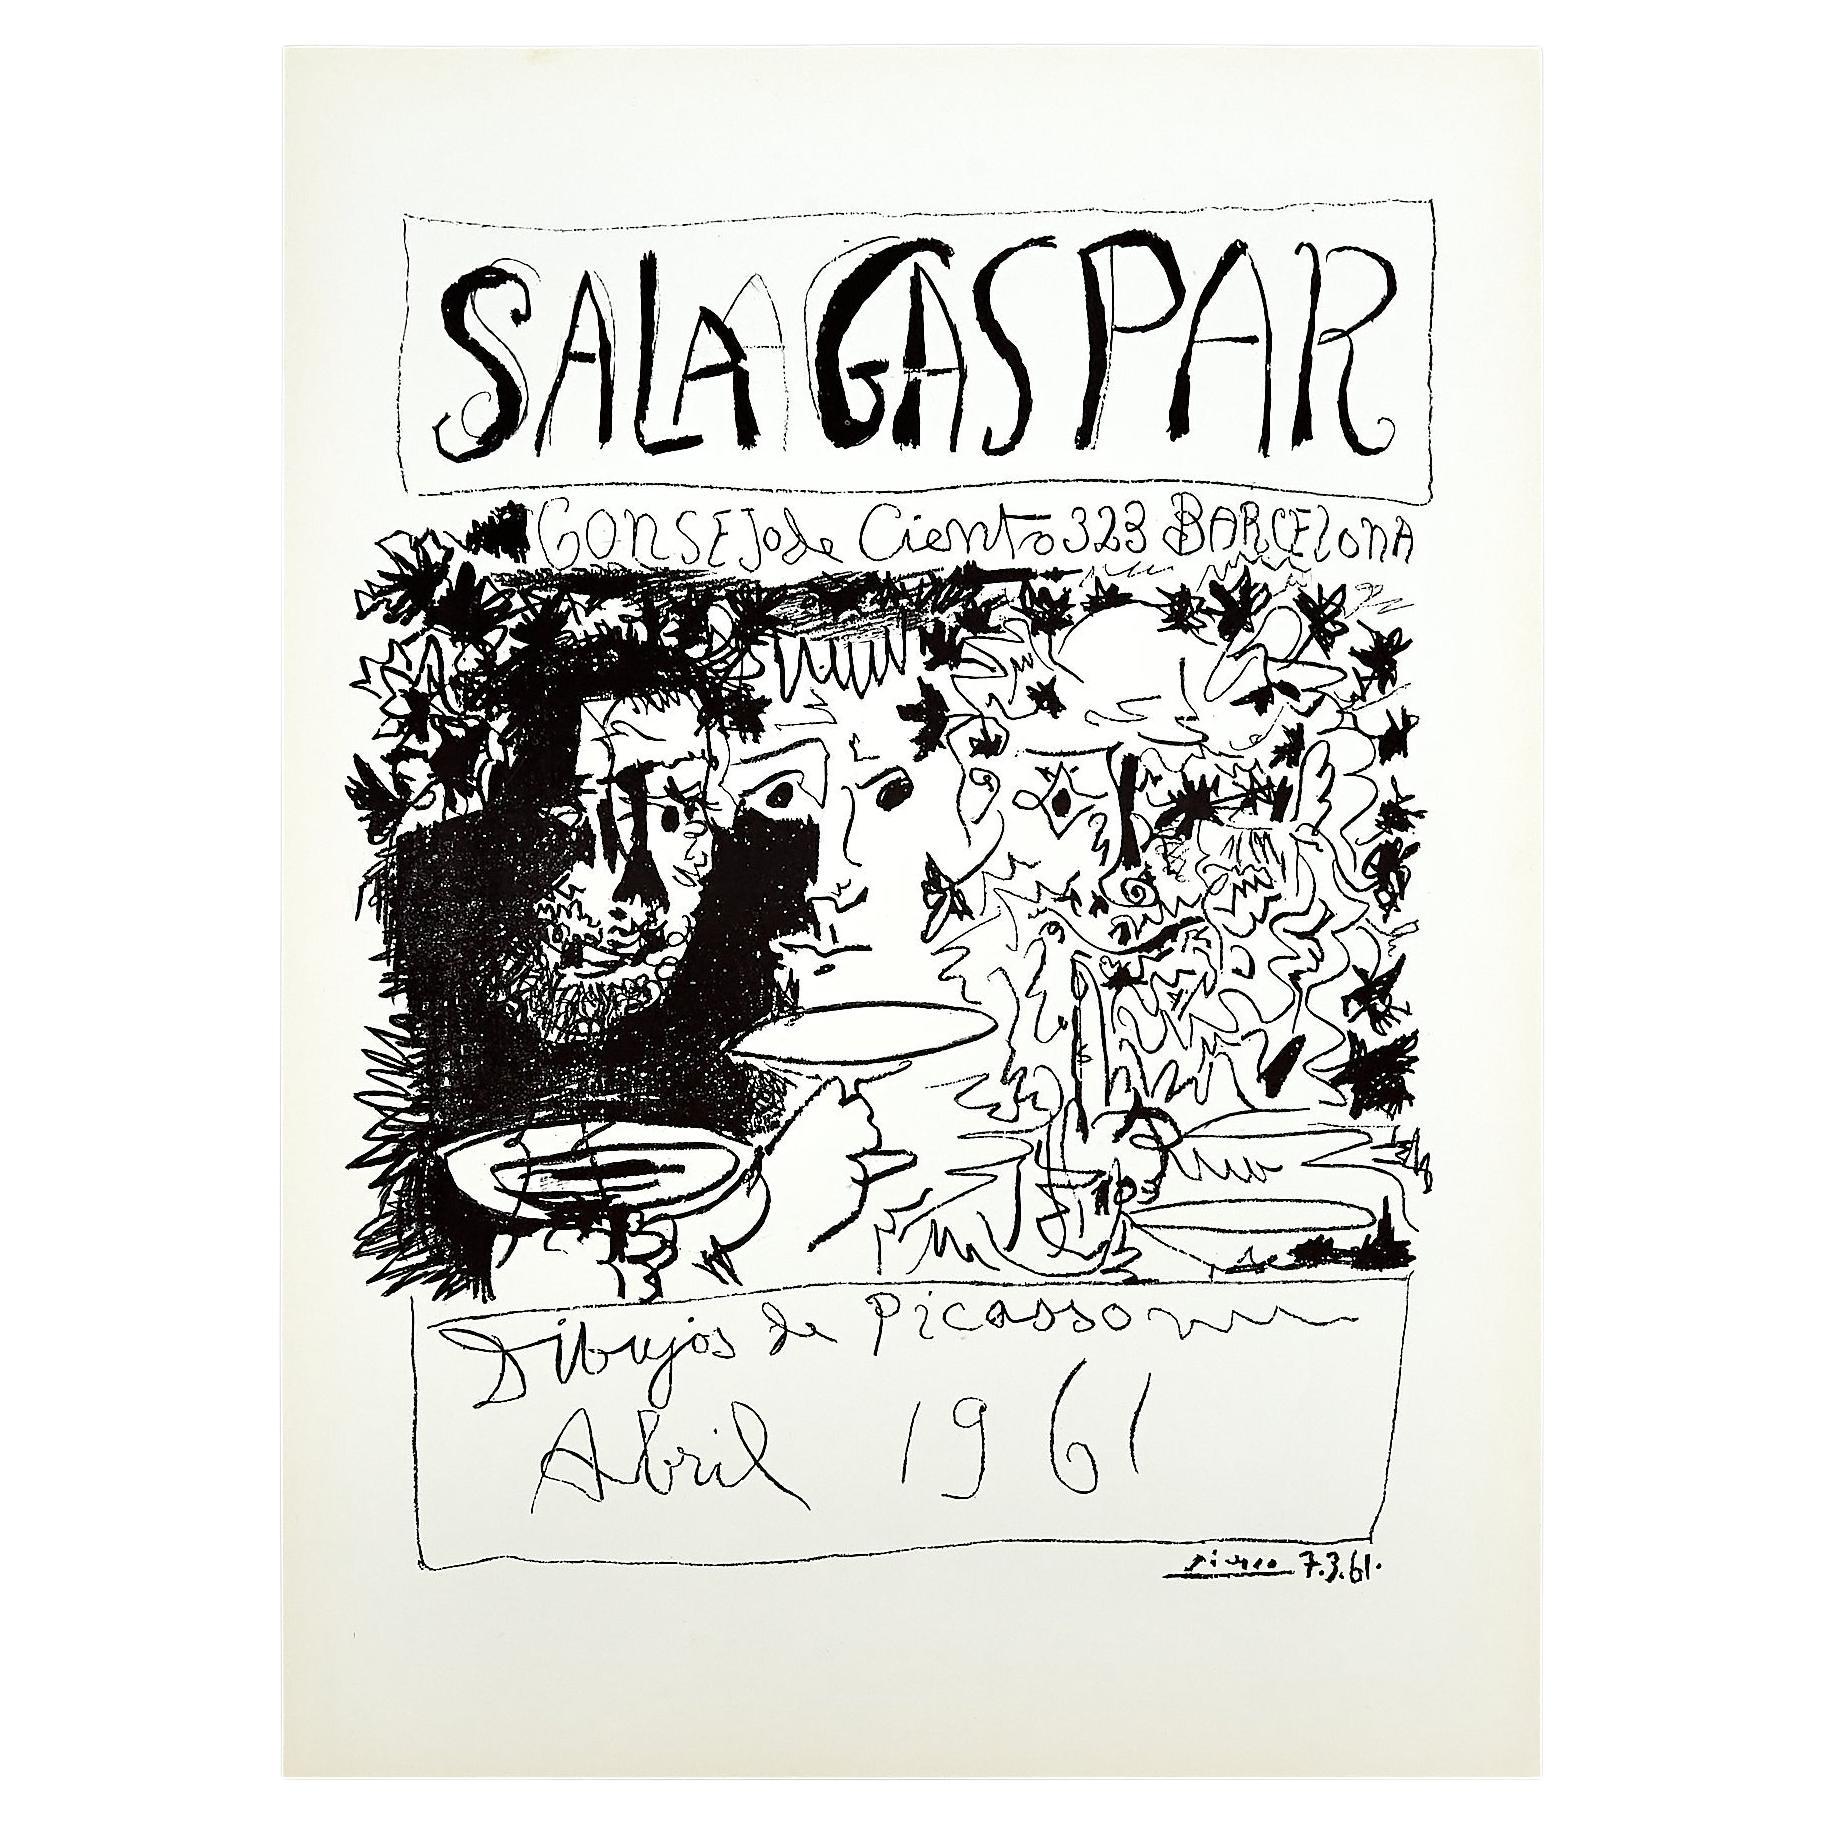 Historical Lithographic Poster of the exhibition Drawings by Picasso, circa 1961